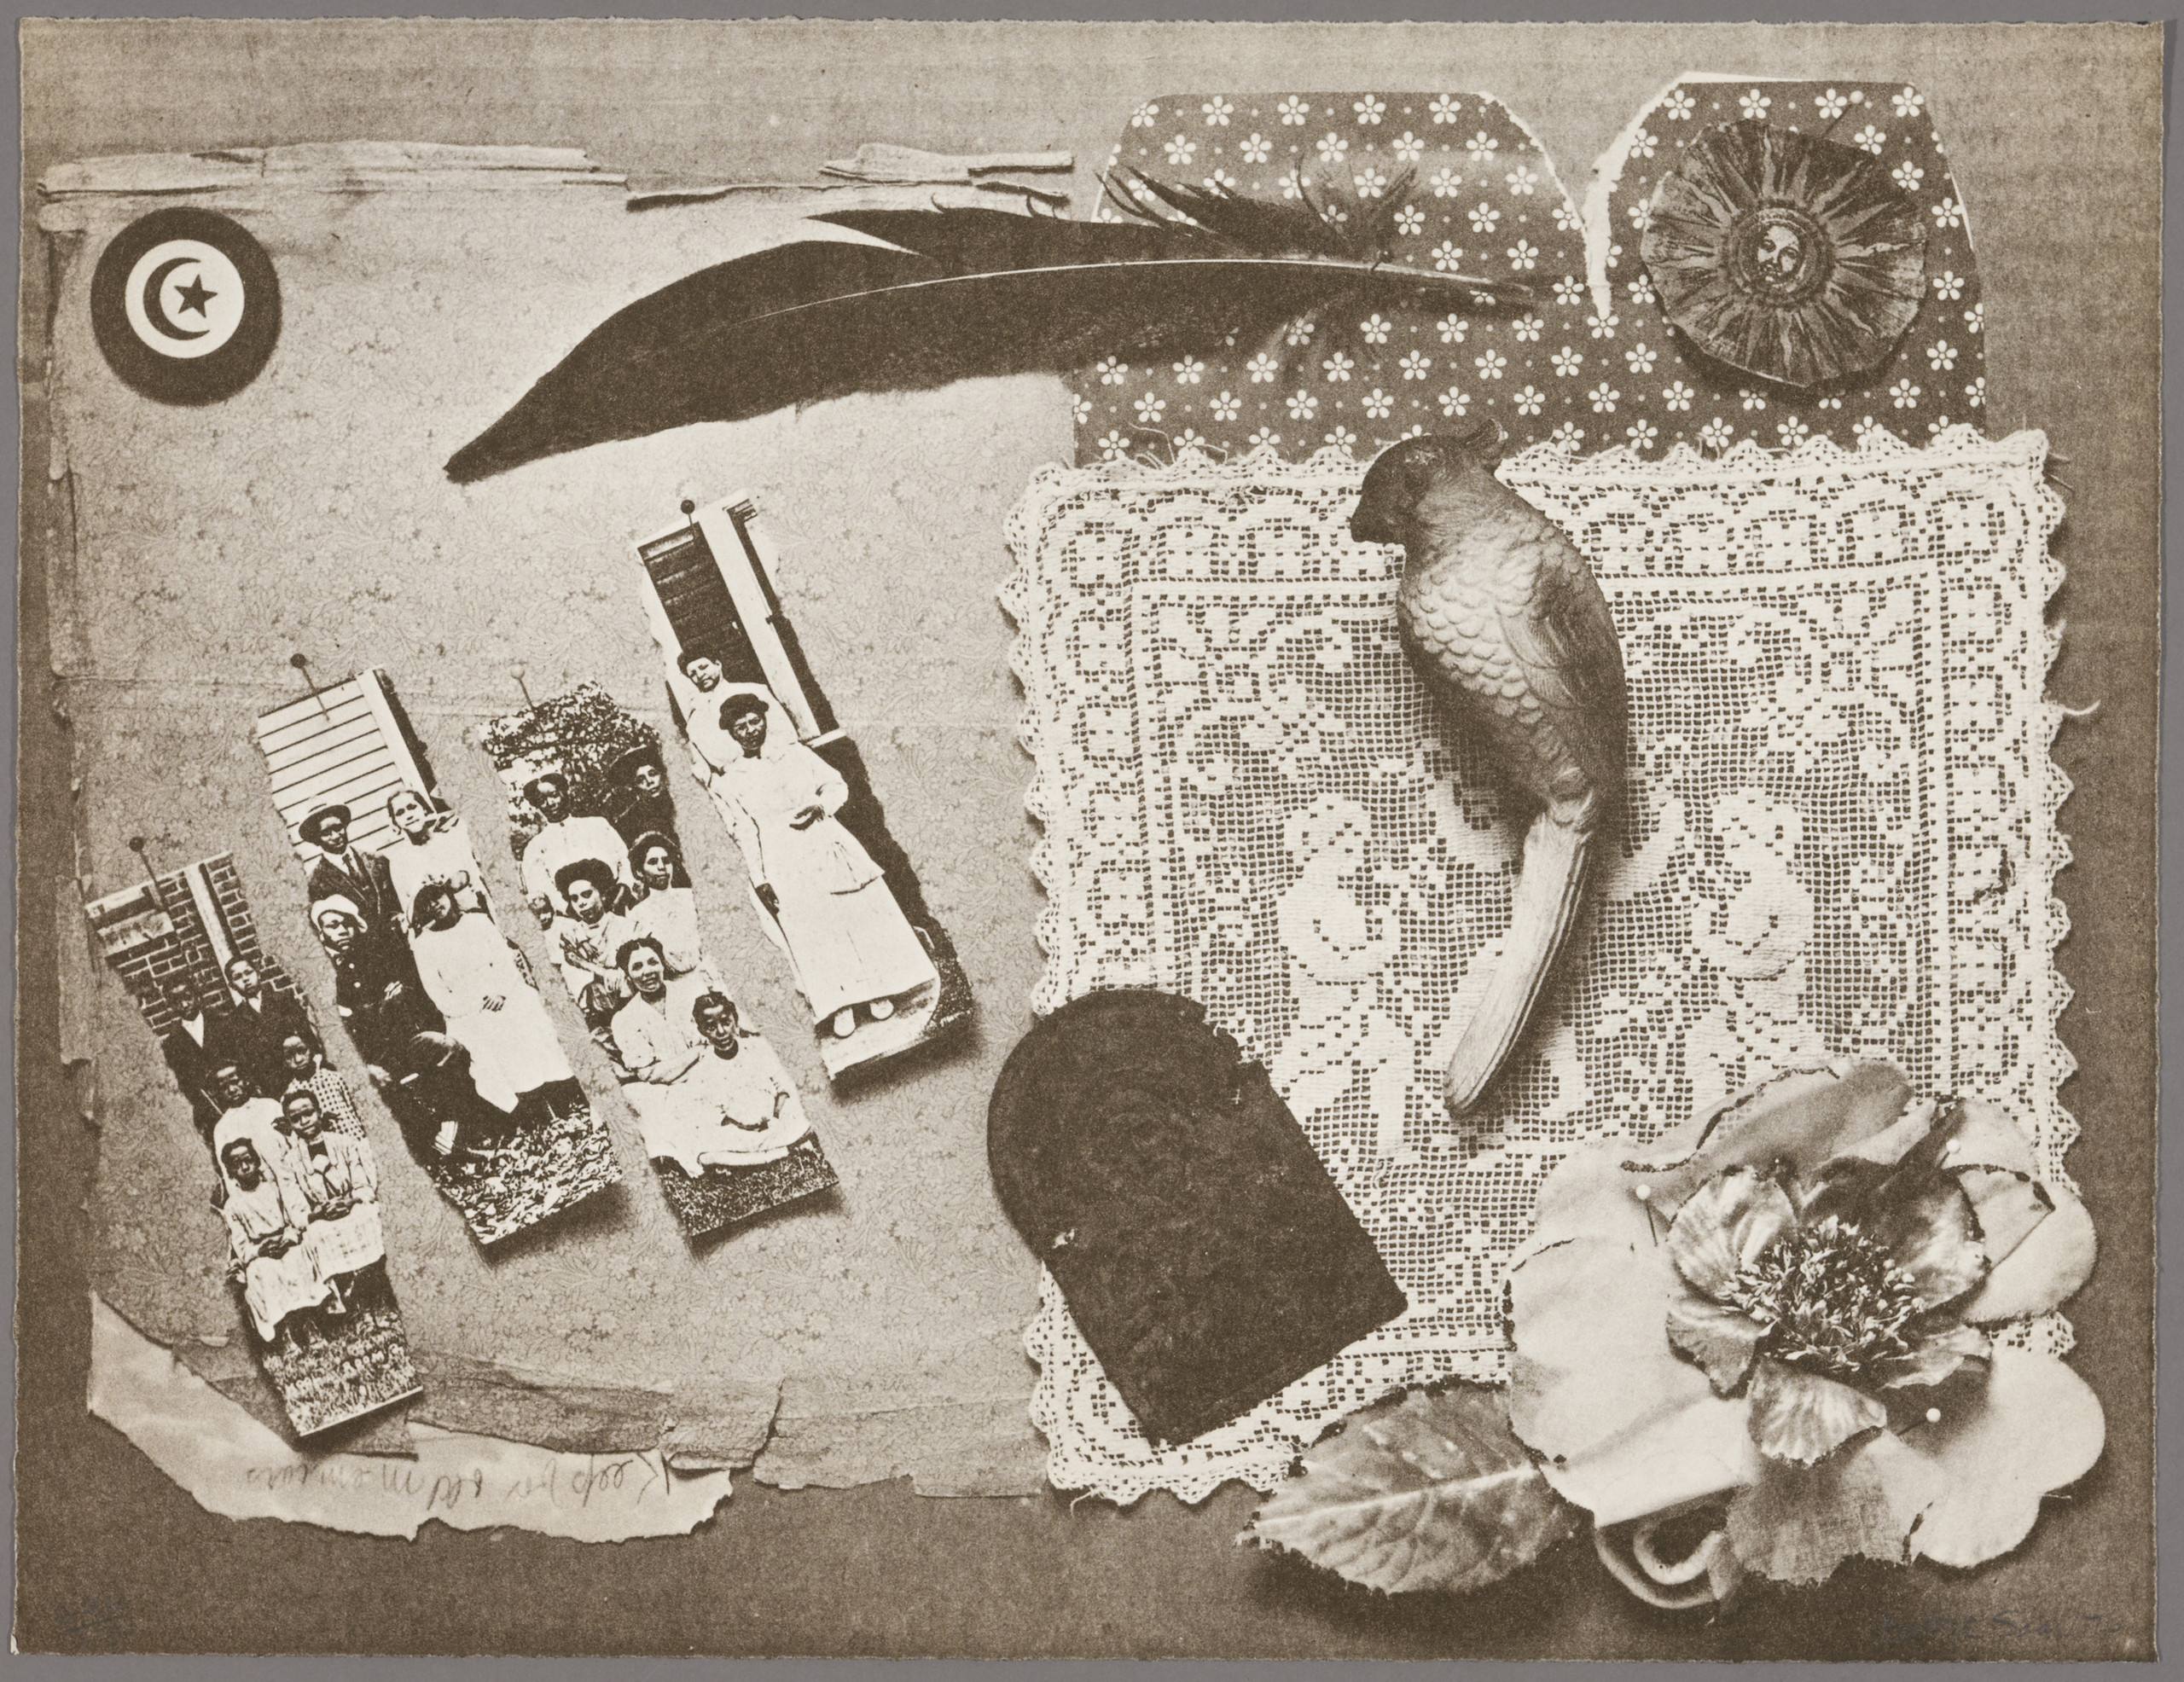 A gray-brown collaged artwork appears to be a collection of seemingly unrelated objects. A lace placemat, a feather, a flower, and an old paper compose much of the work. The left-hand side features a photograph torn to strips, showing a group portrait of dark-skinned people in formal attire.